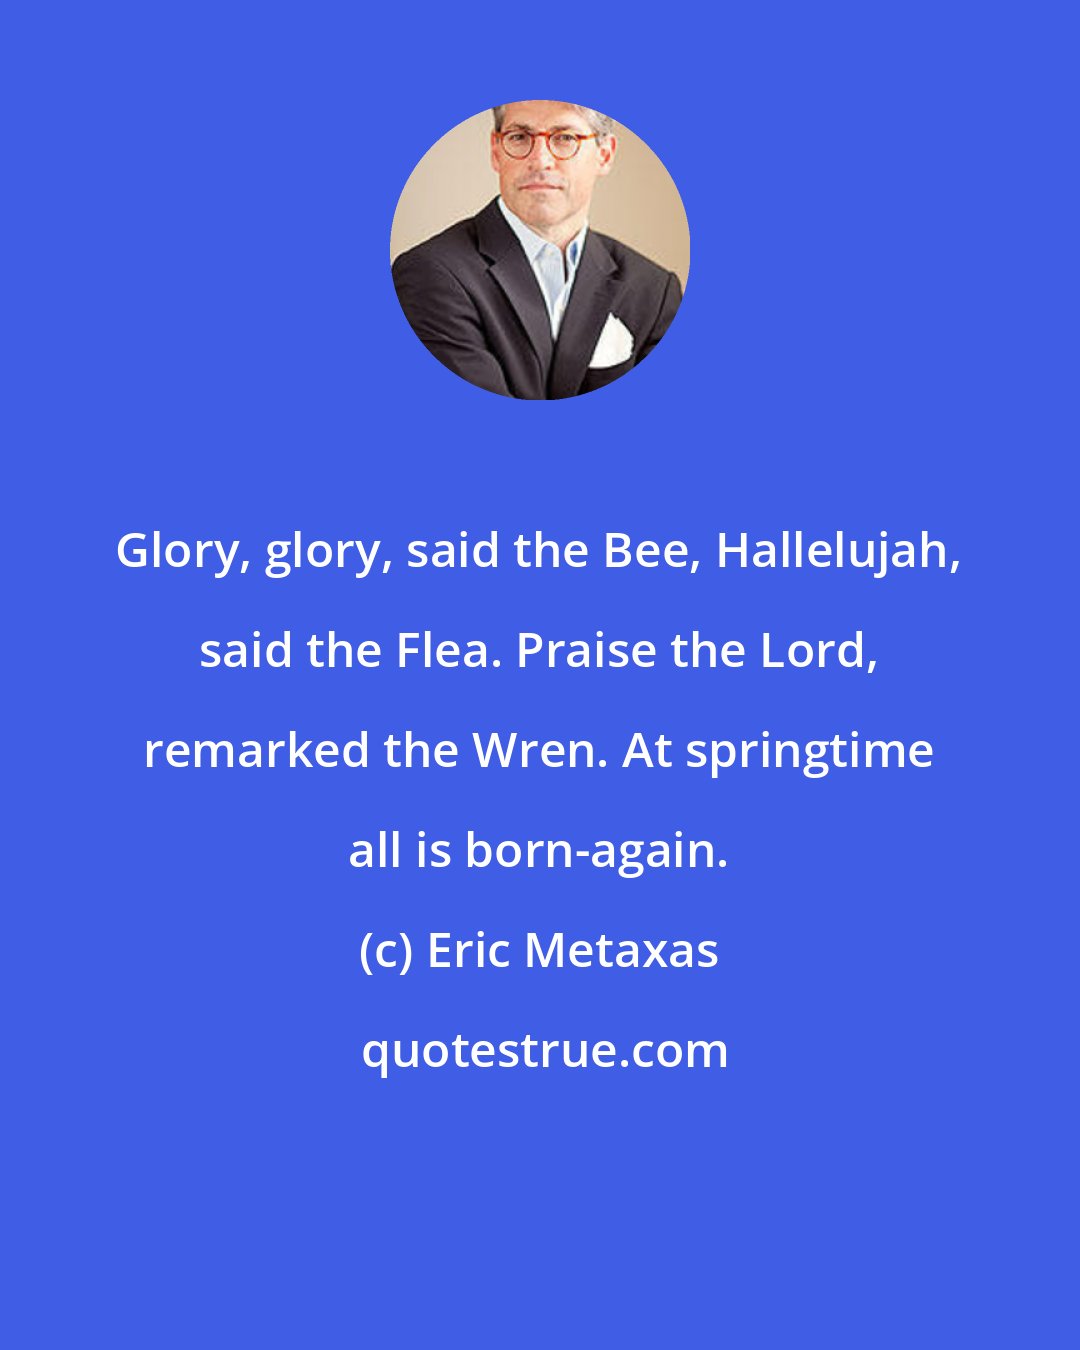 Eric Metaxas: Glory, glory, said the Bee, Hallelujah, said the Flea. Praise the Lord, remarked the Wren. At springtime all is born-again.